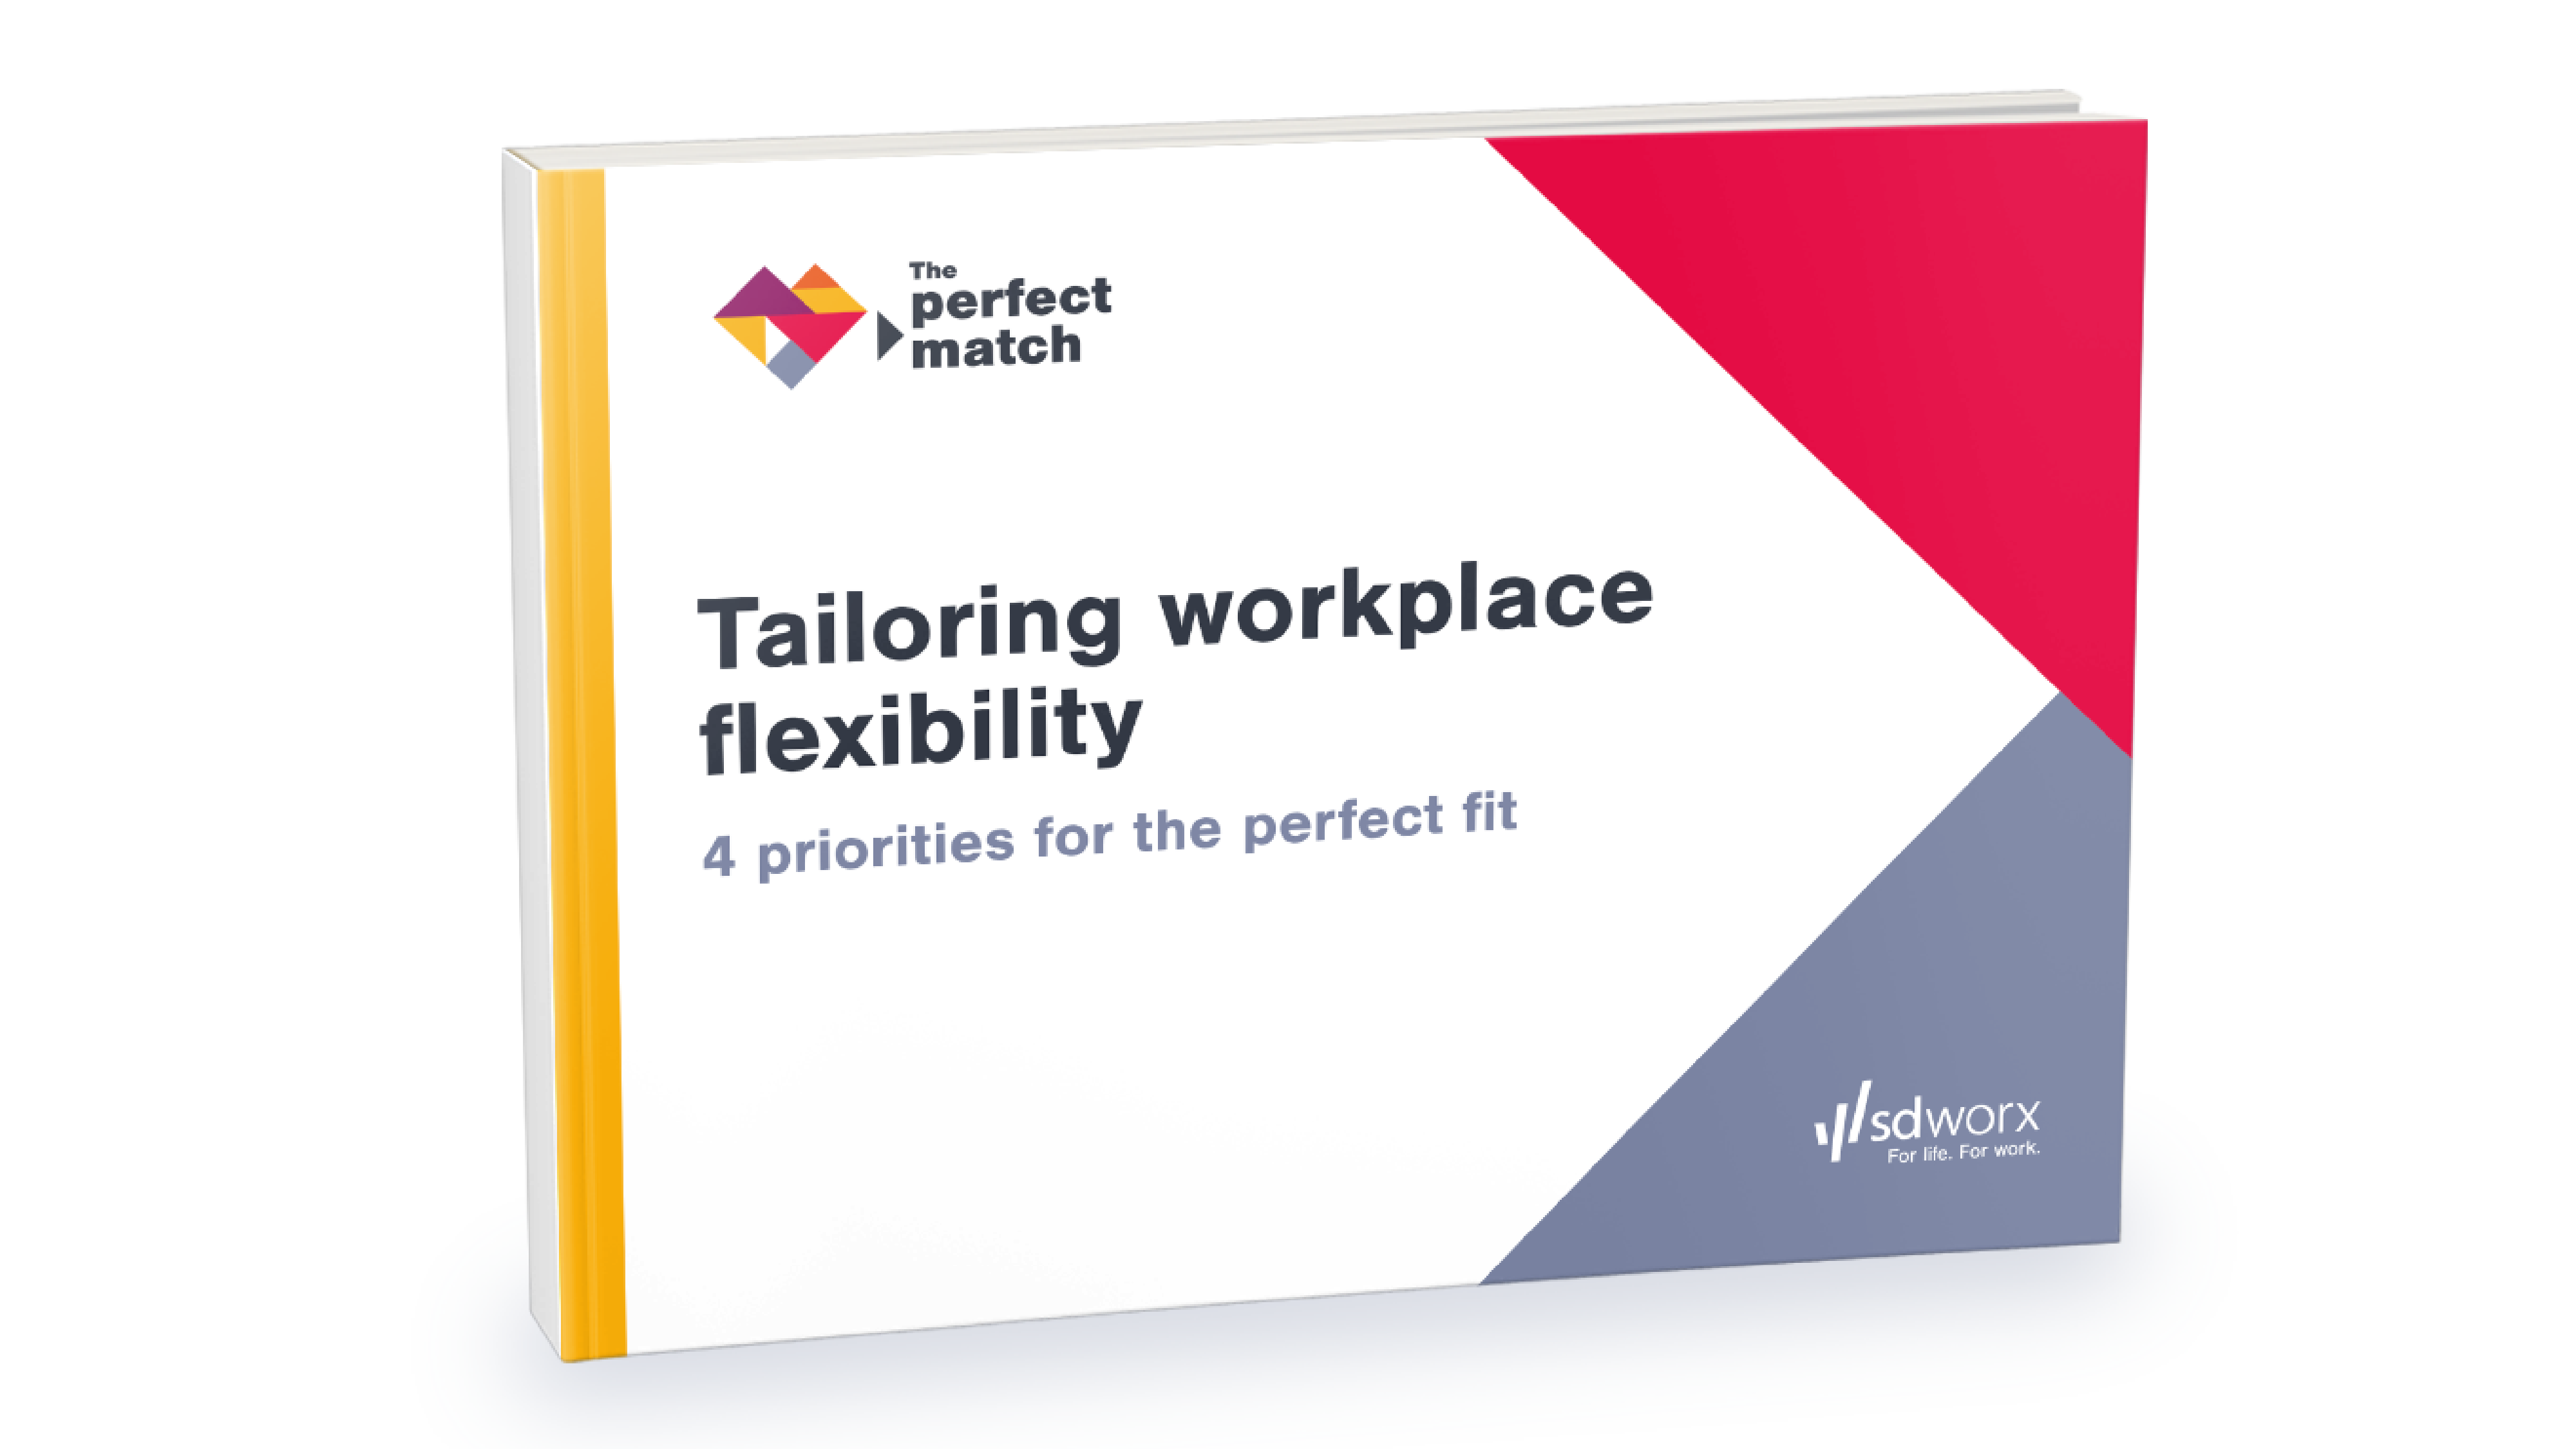 Tailoring workplace flexibility